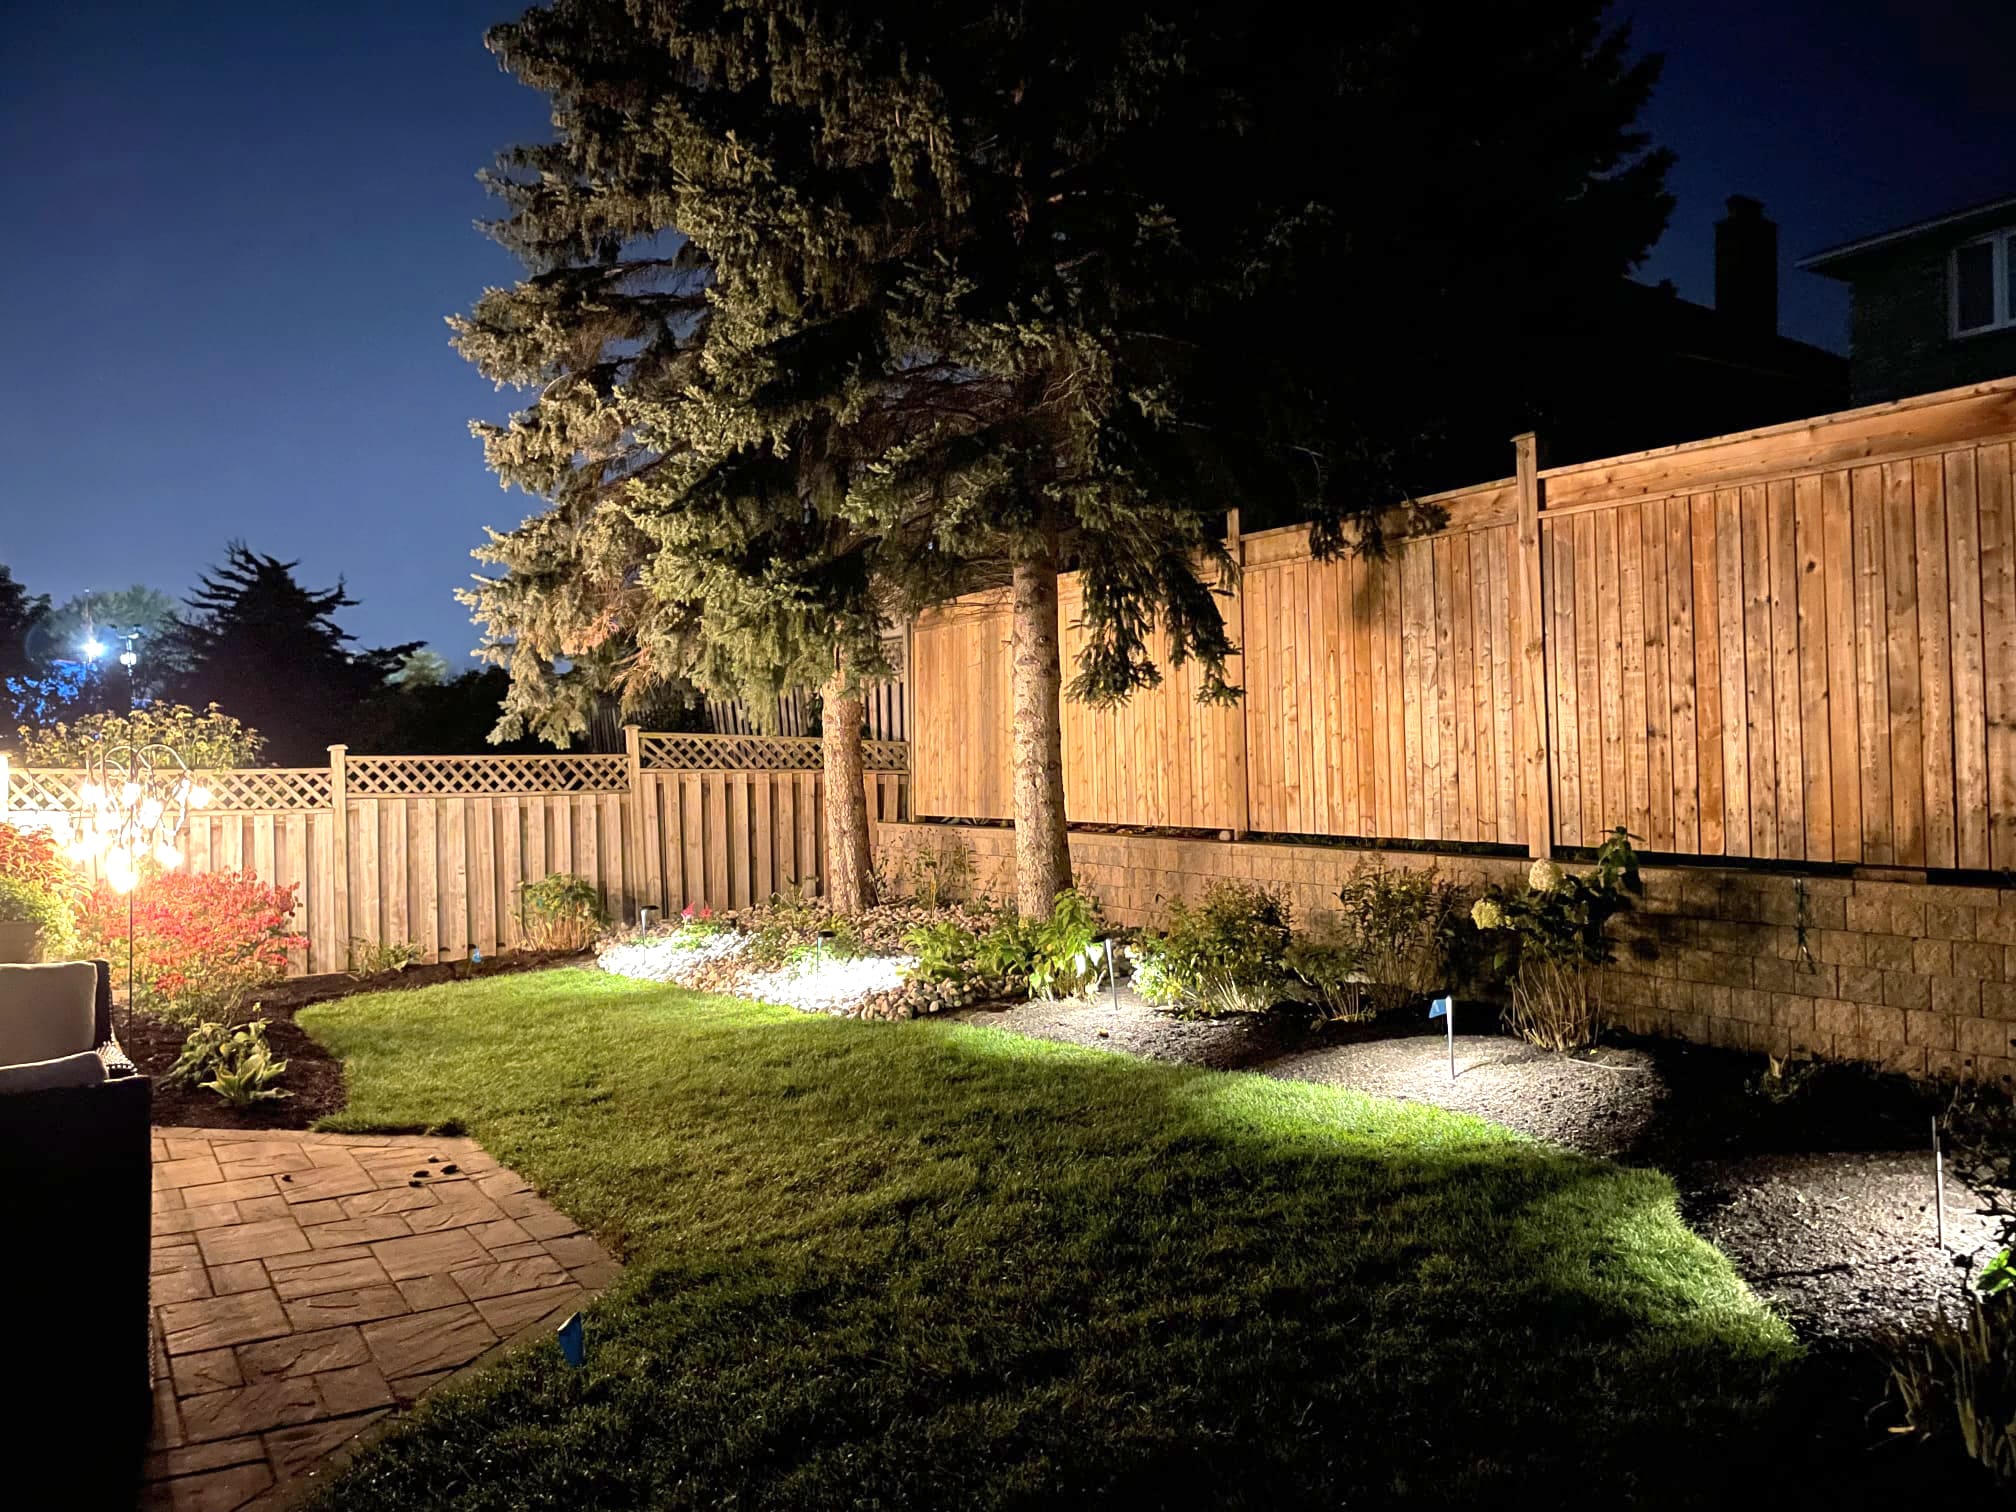 Lomota Gardening Project 4 -After. Night shot of beautifully manicured garden with ground level lighting and patio stones.